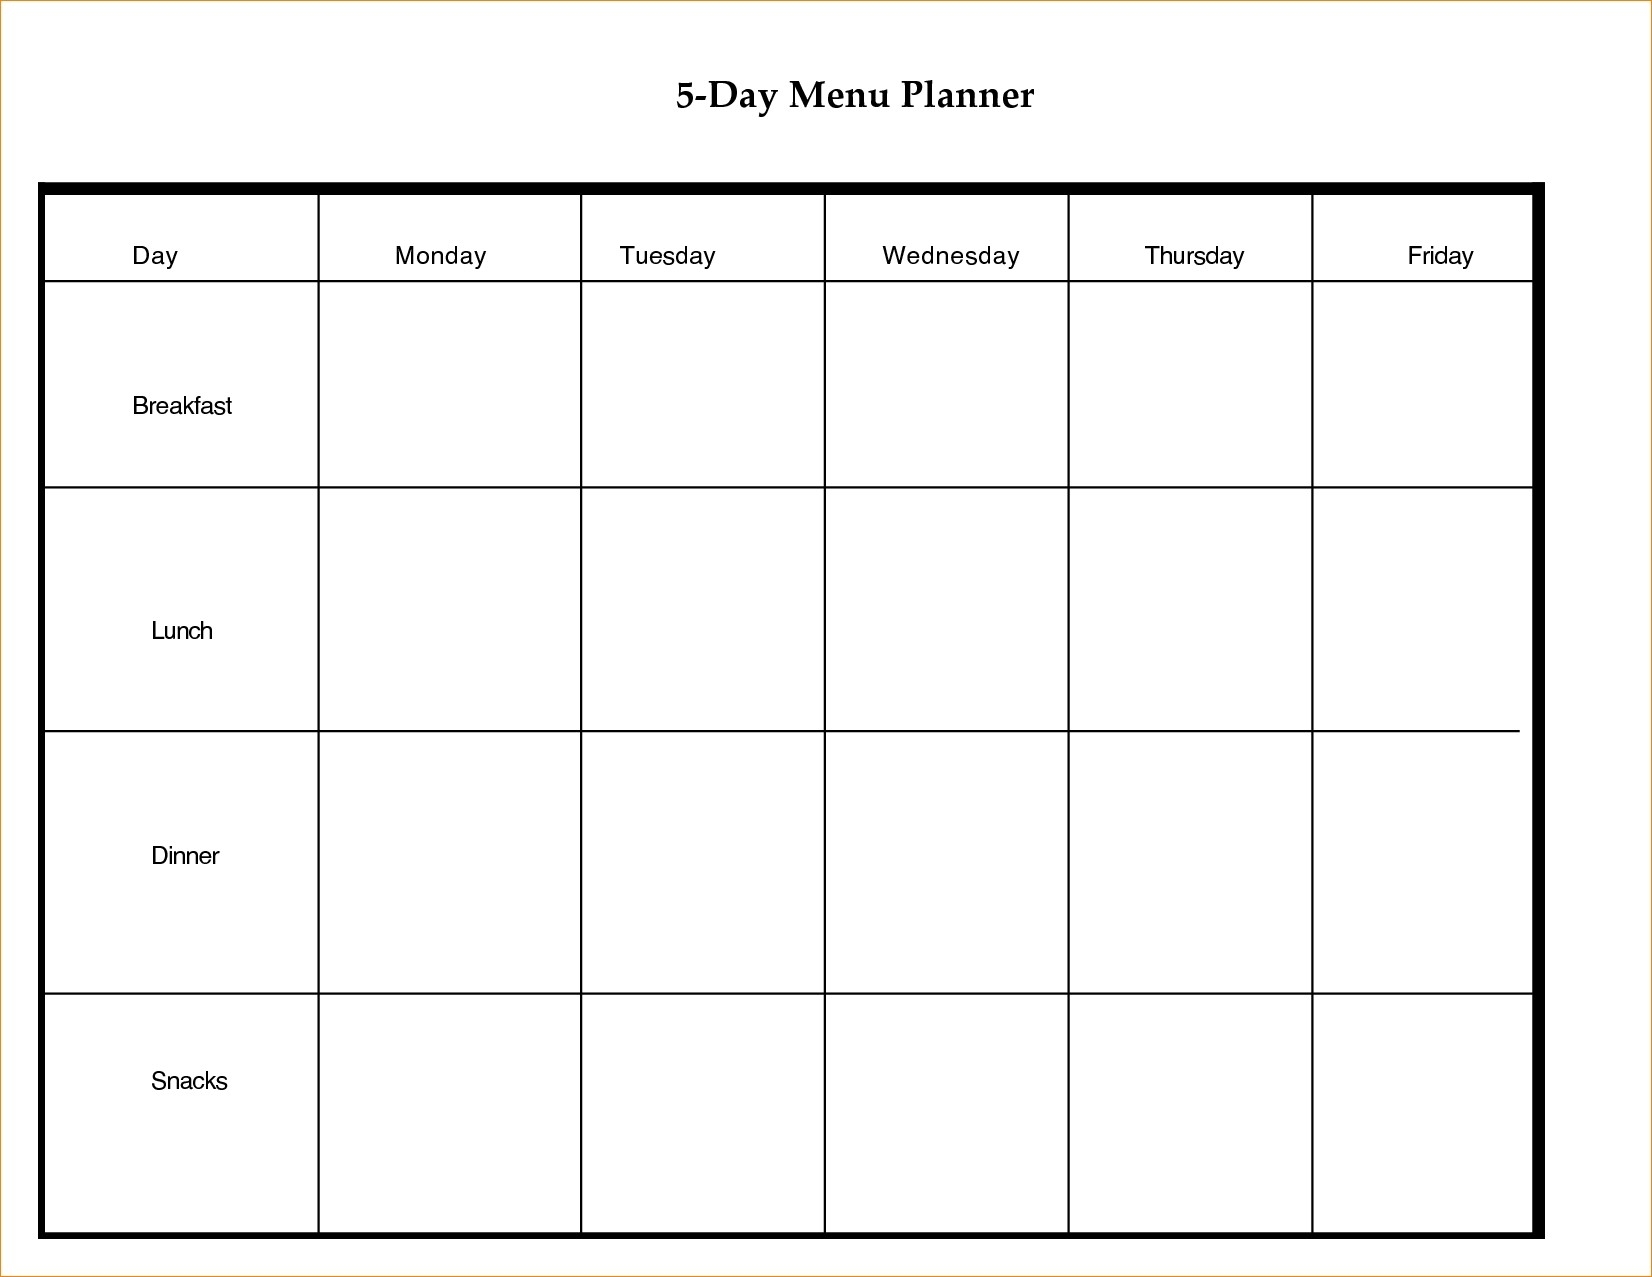 Calendar Template Without Days Of The Week Free | Smorad for Days Of The Week Calendar Template